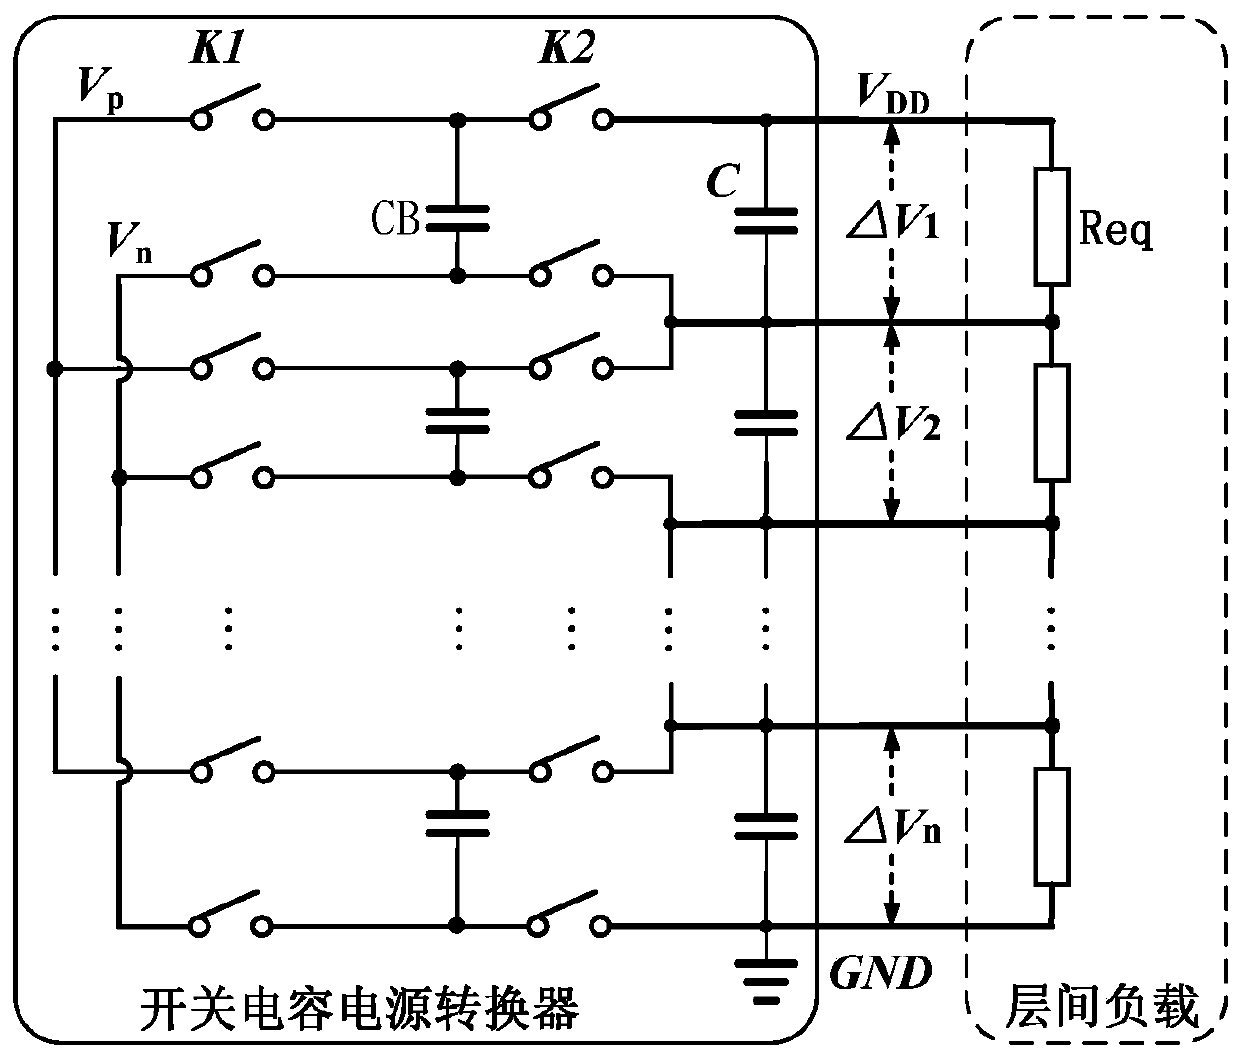 A Multi-output Switched Capacitor Converter Suitable for Multilayer Stacked Loads